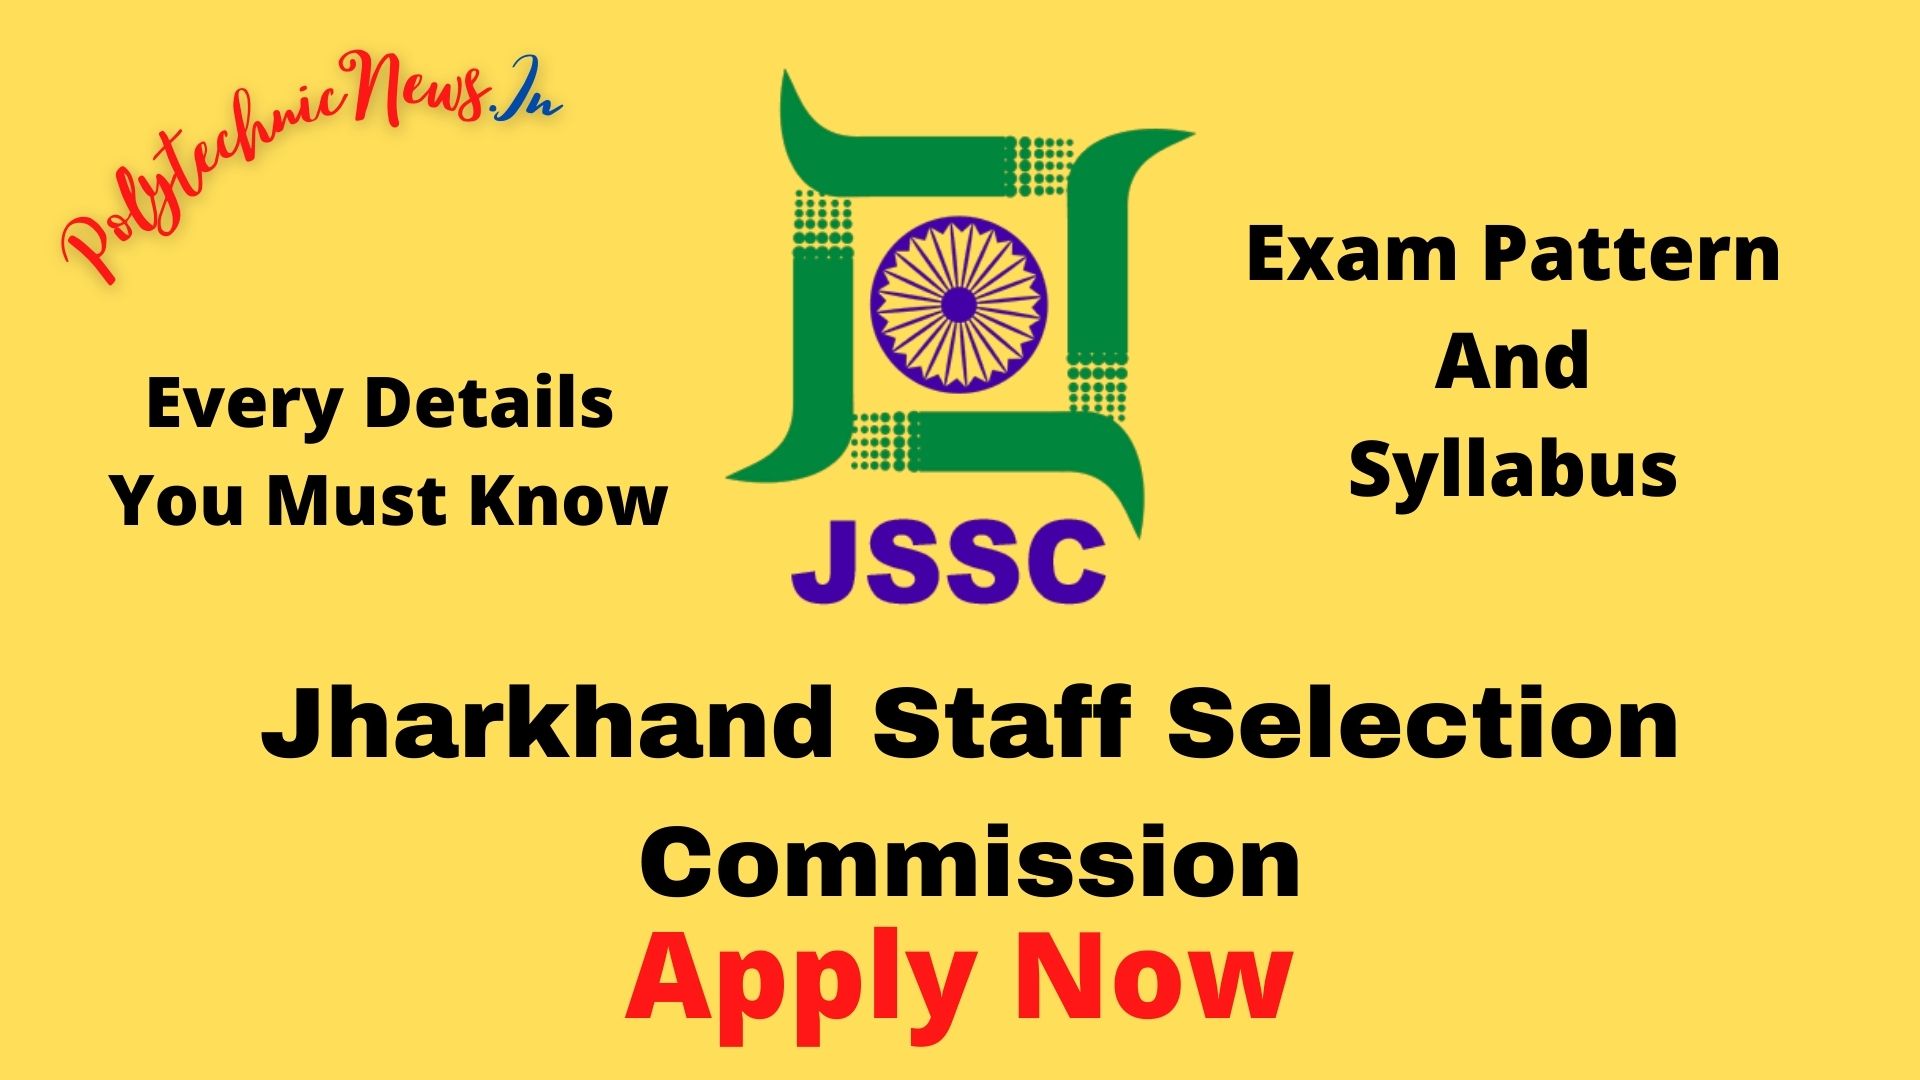 jssc je exam pattern and syllabus